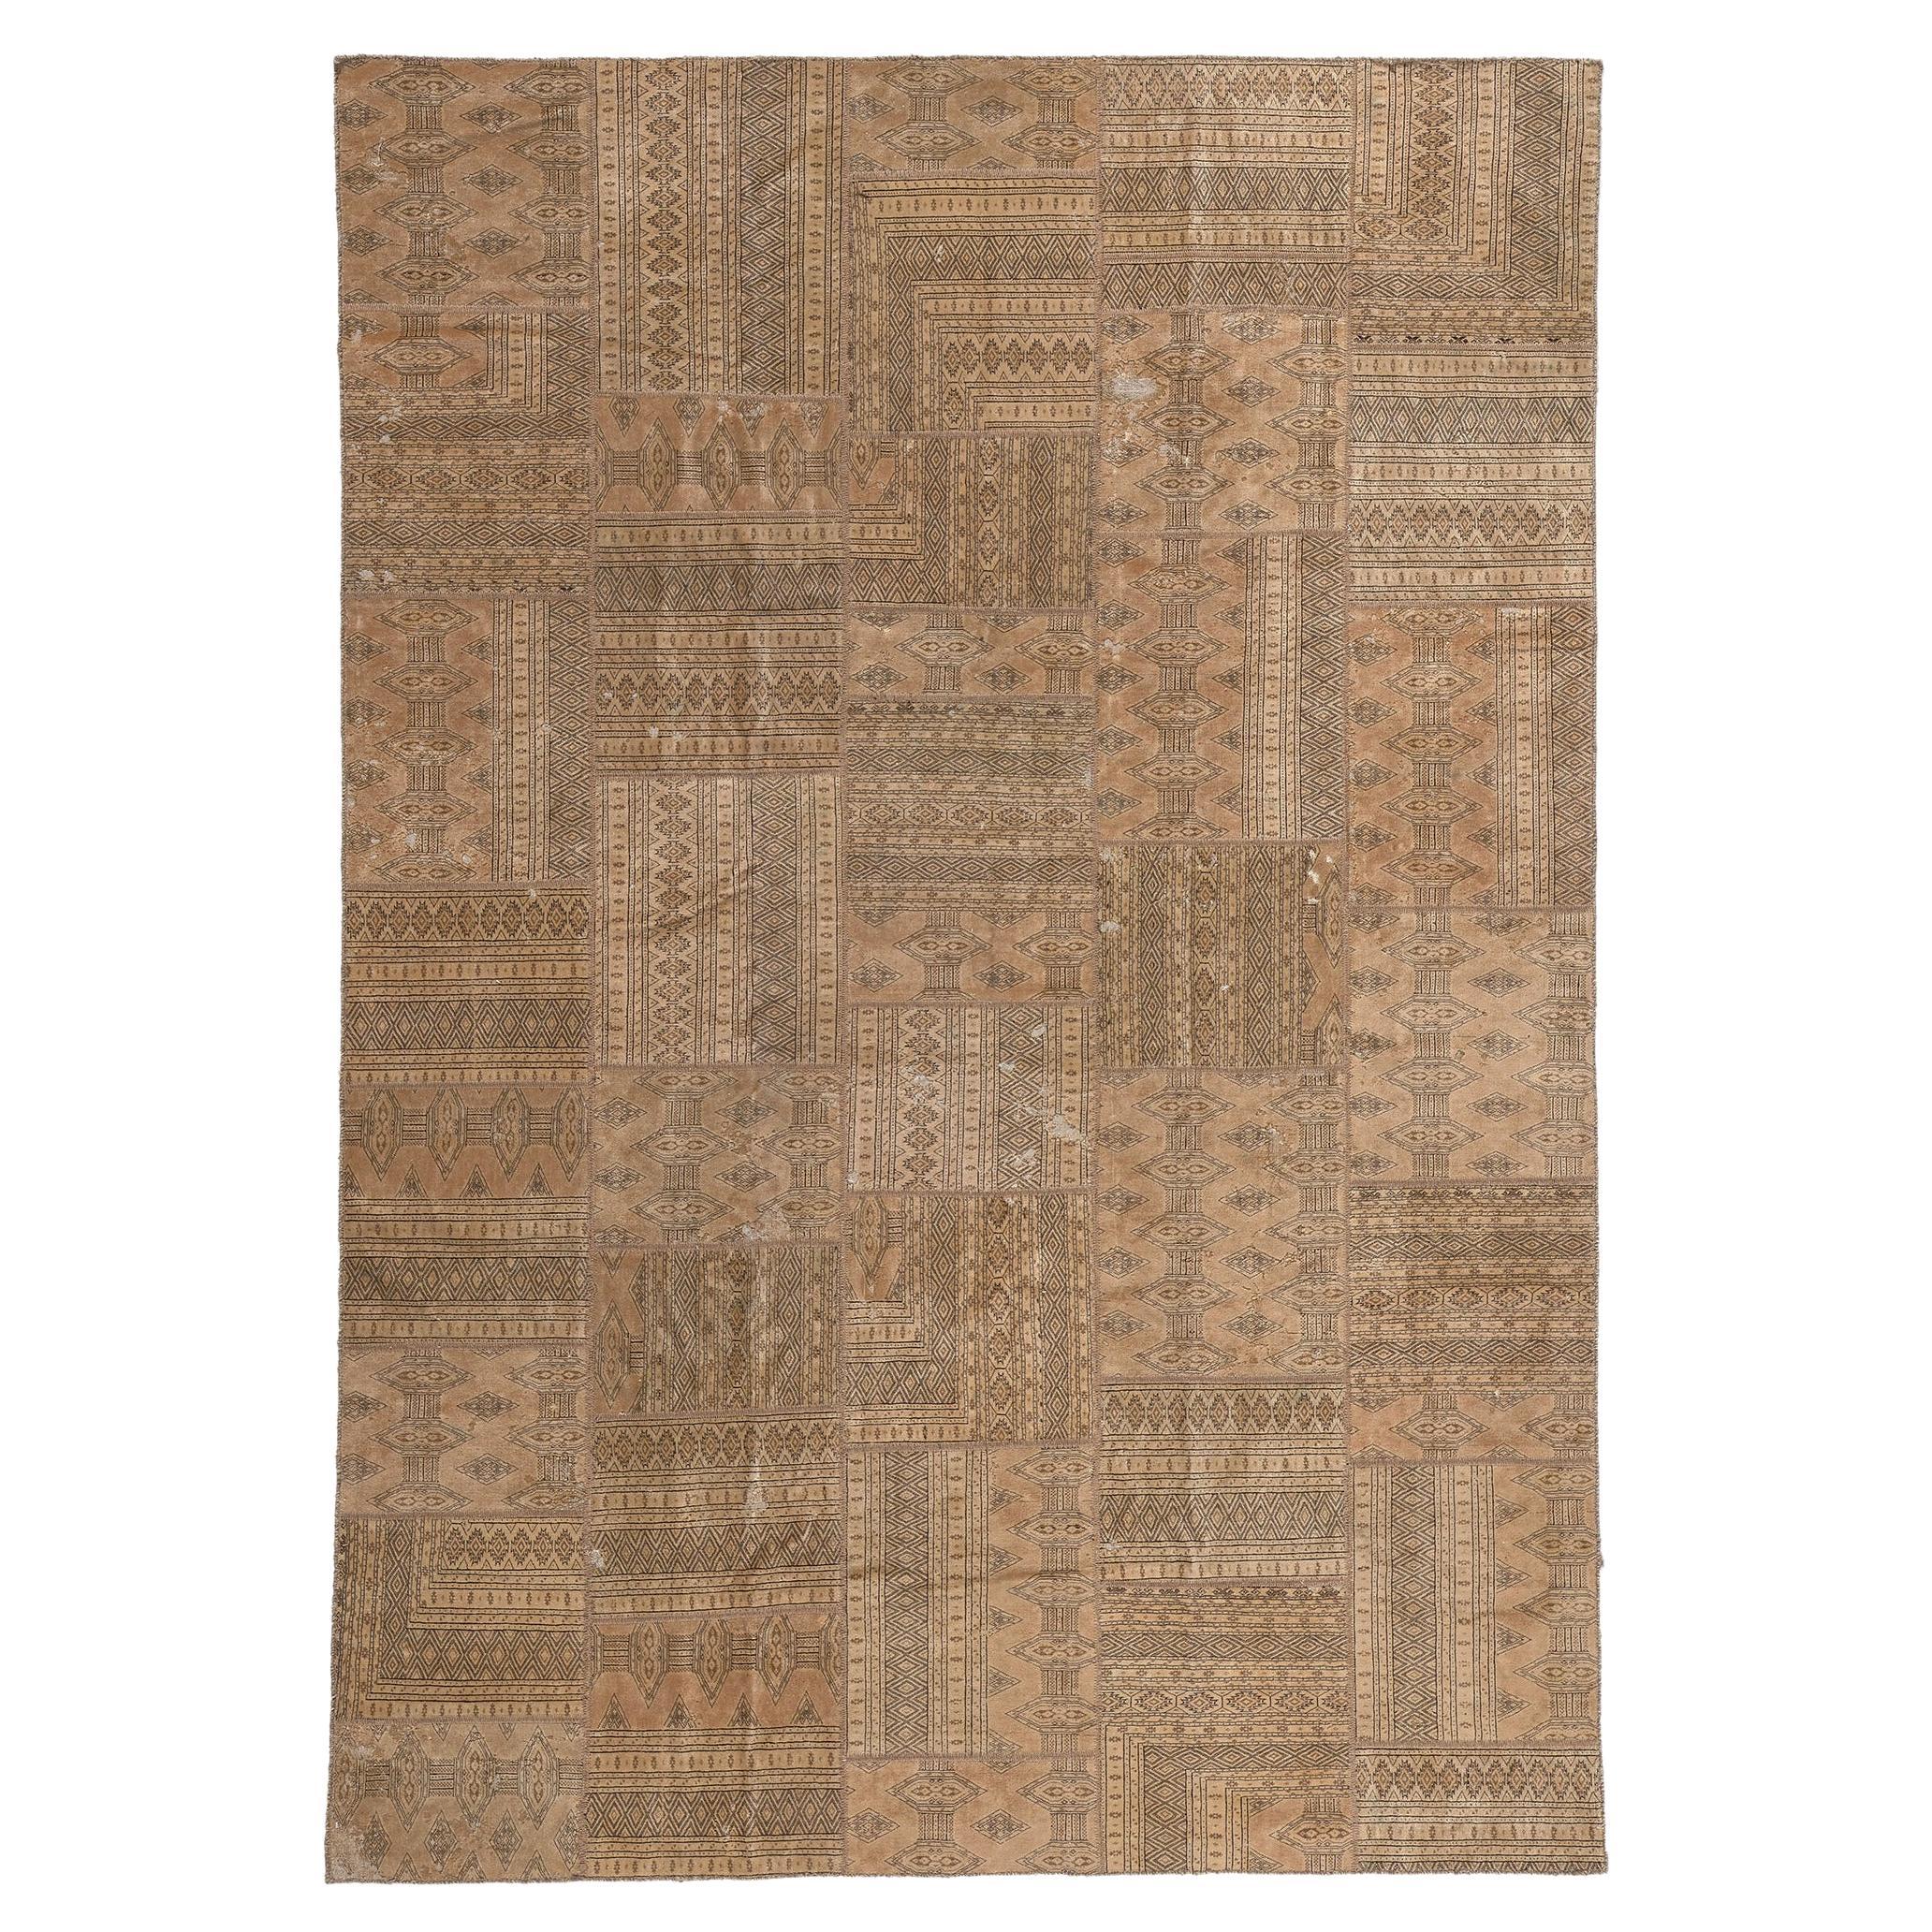 Rustic and Refined Vintage Neutral Persian Turkoman Patchwork Rug, Wool and Silk